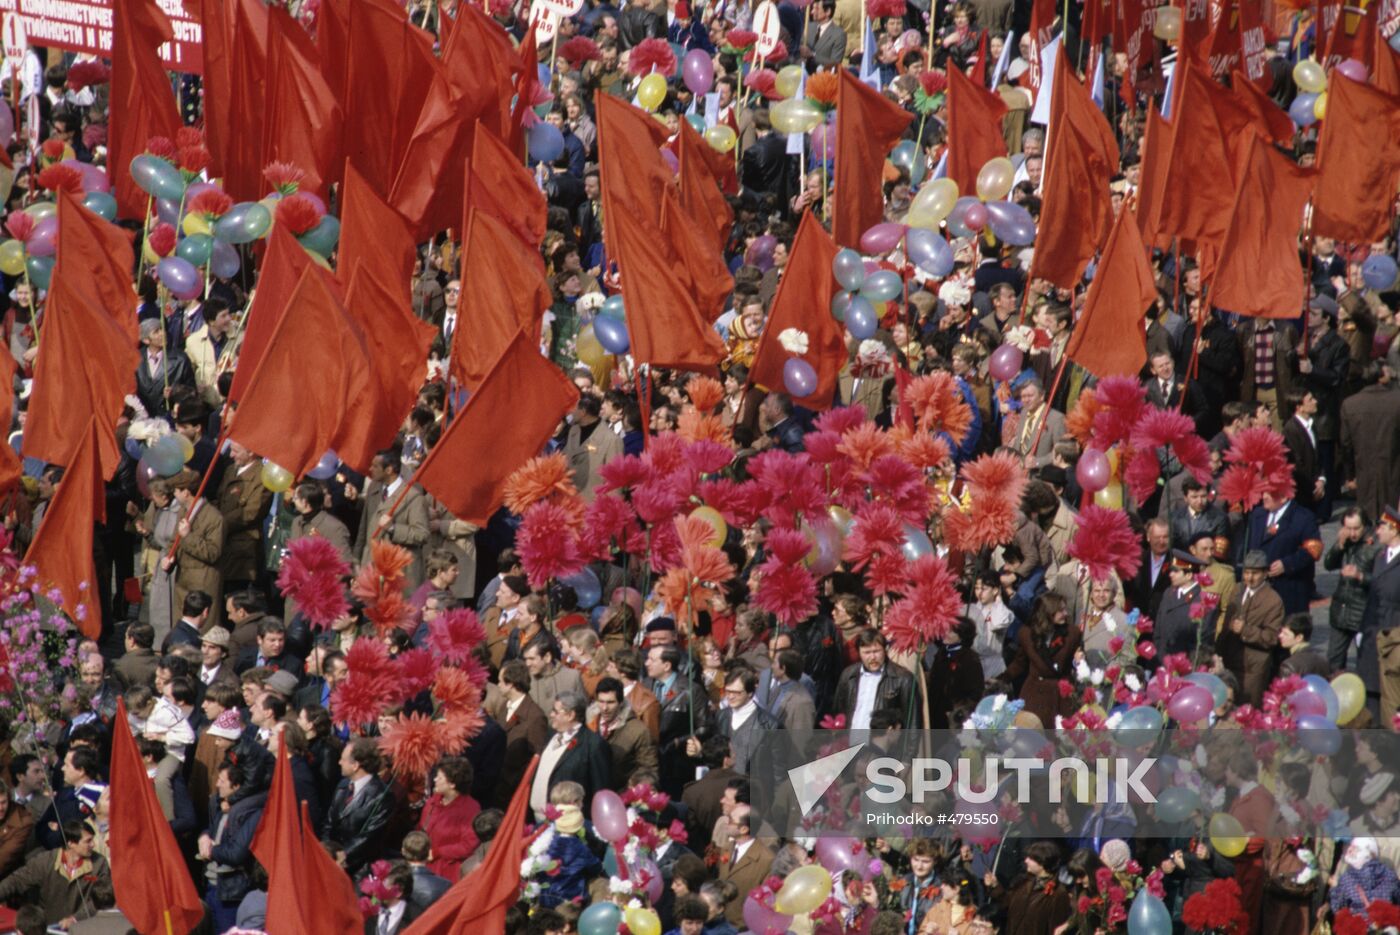 May 1 demonstration on Red square